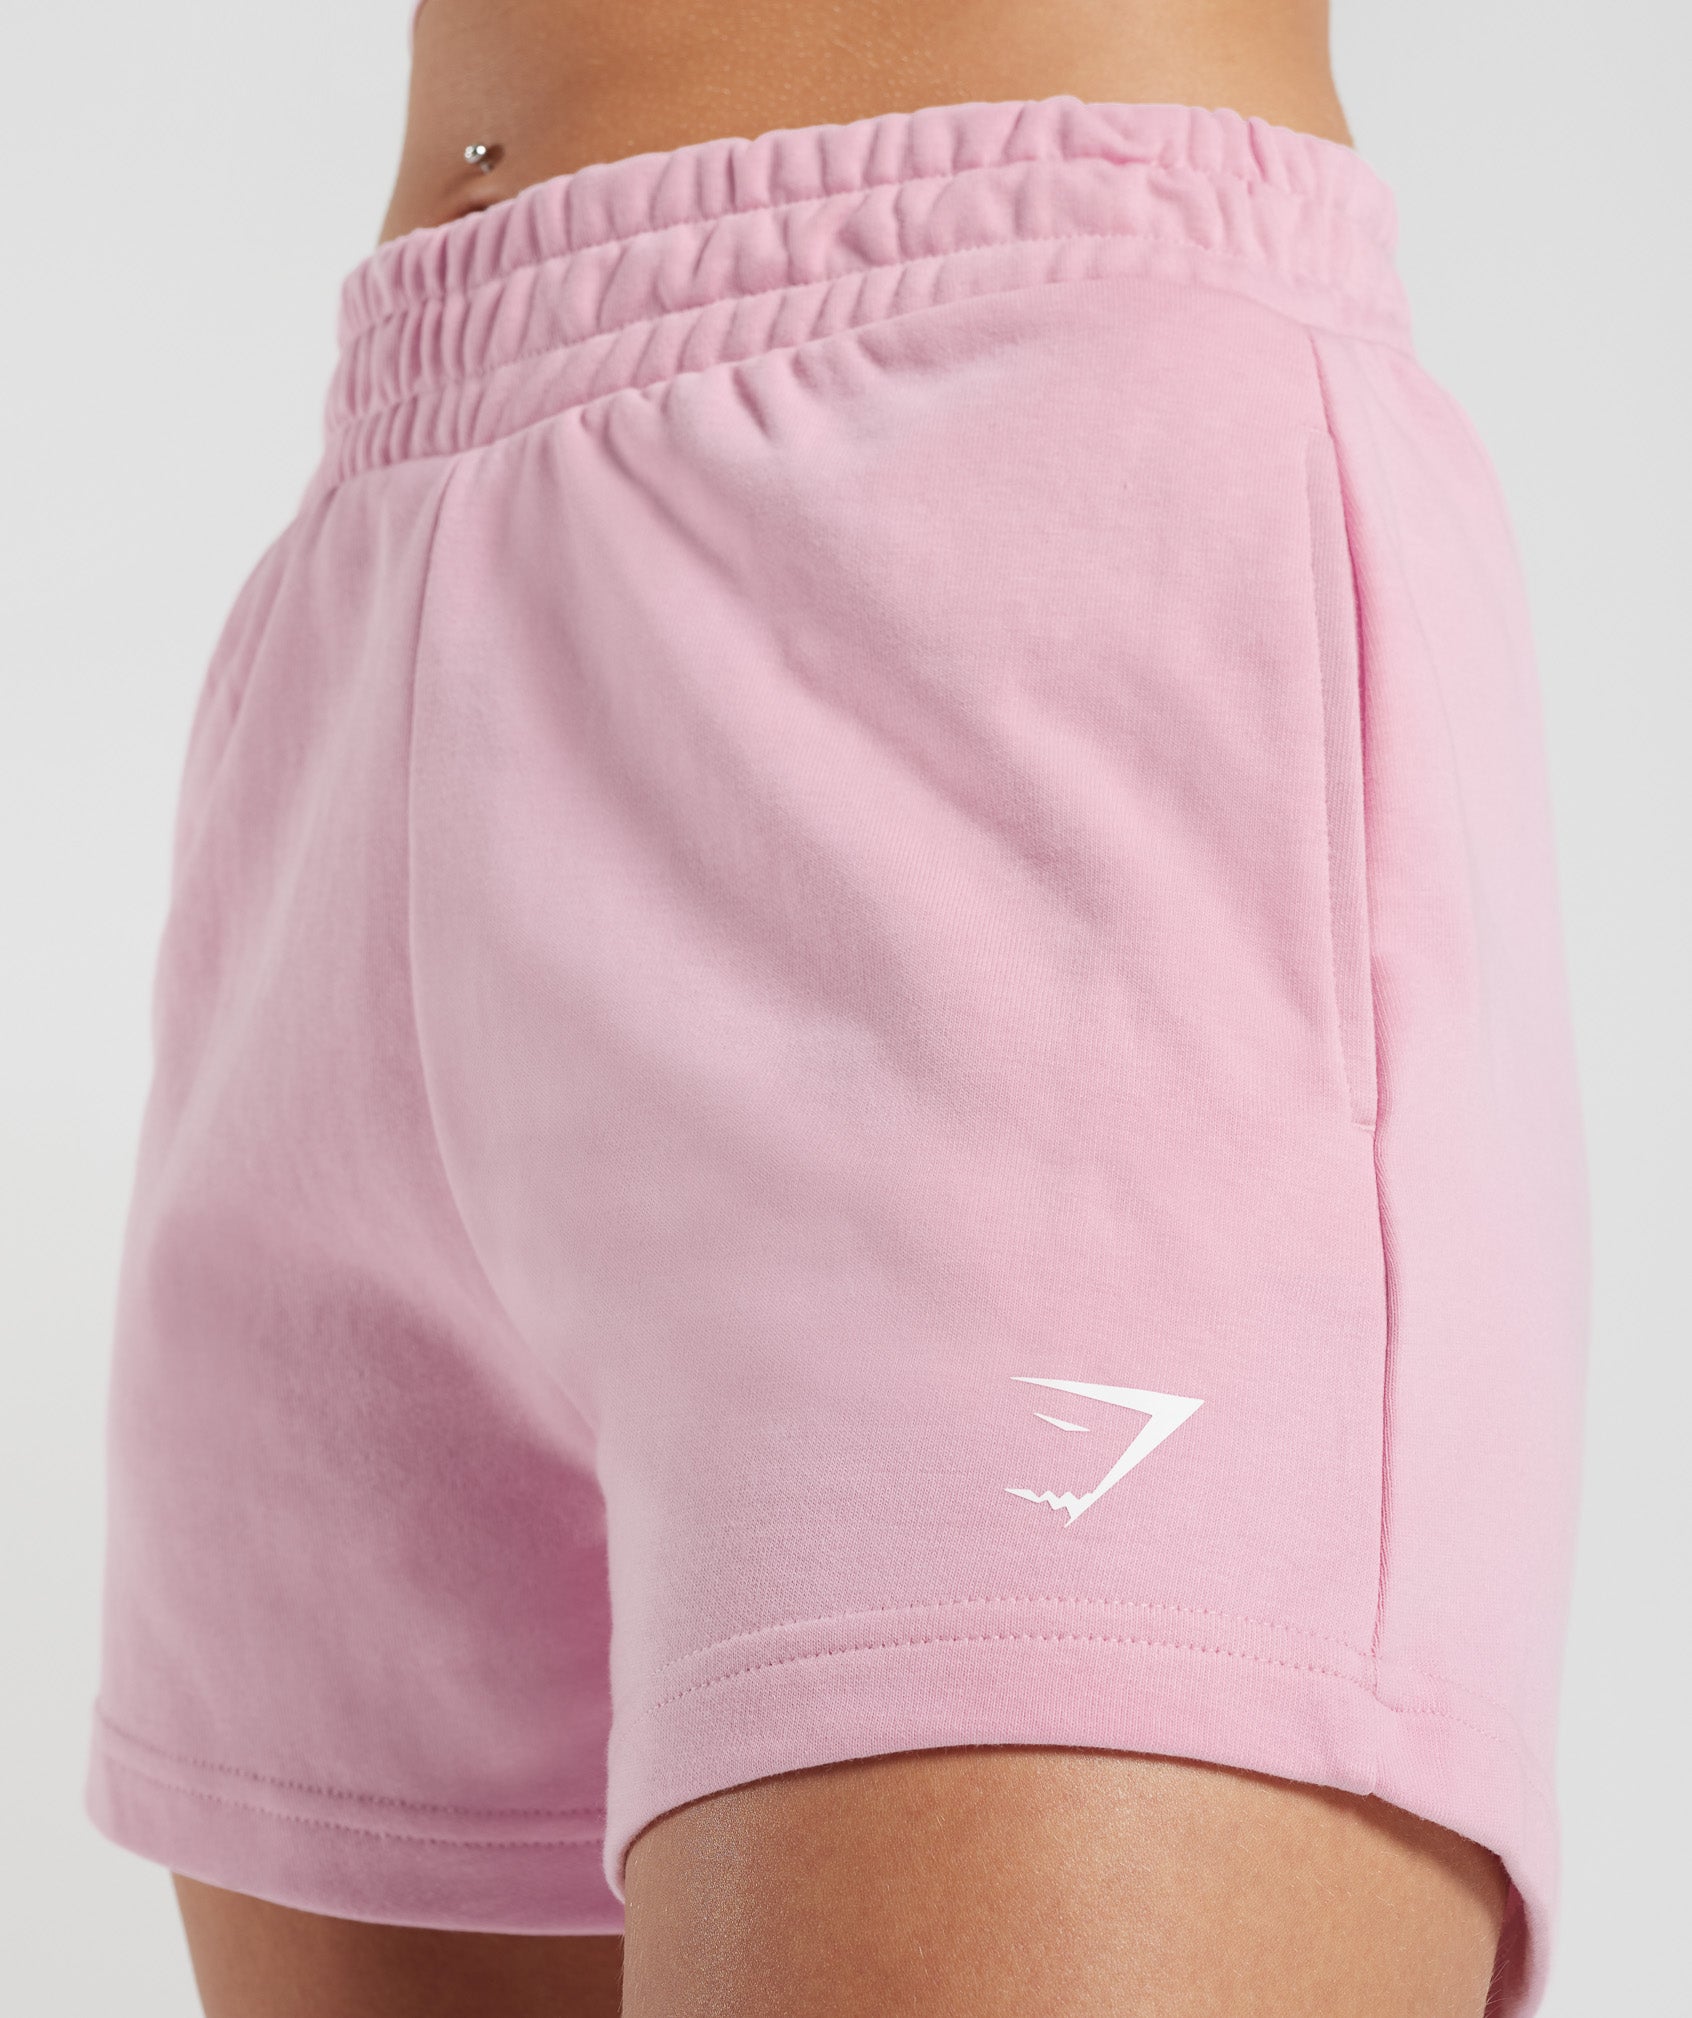 Strong Peach Shorts in Candy Floss Pink - view 5